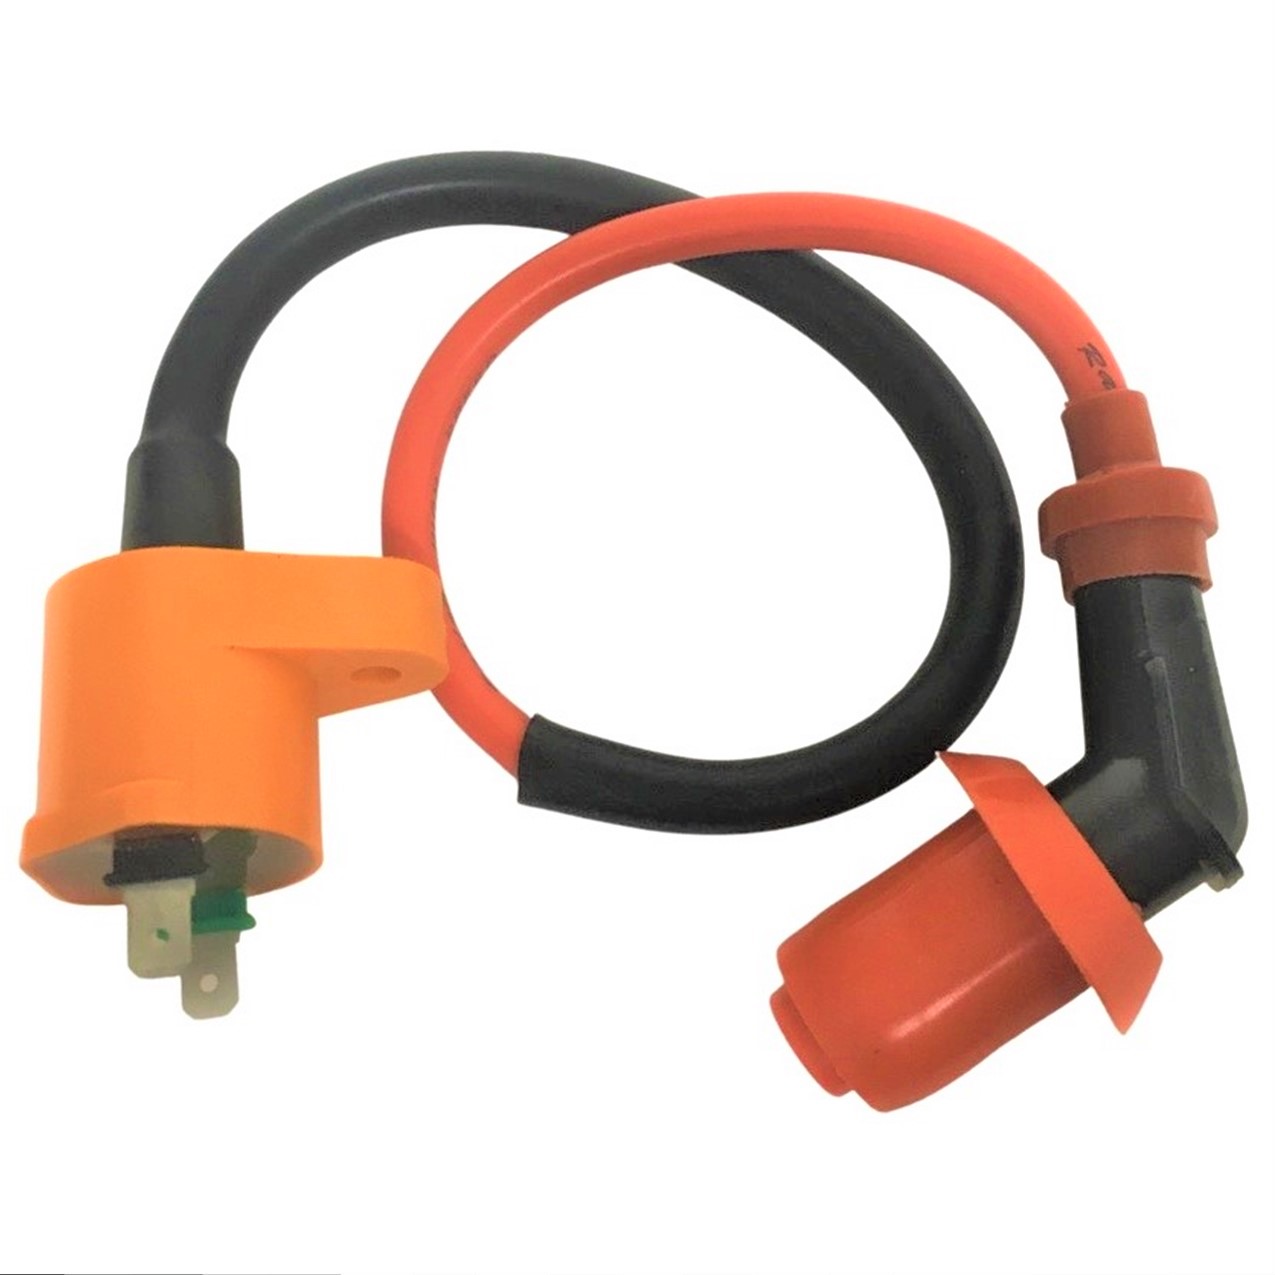 HIGH PERFORMANCE Ignition Coil Wire=15" Fits Most ATVs, GoKarts, Scooters With GY6-50,125,150,180cc Motors